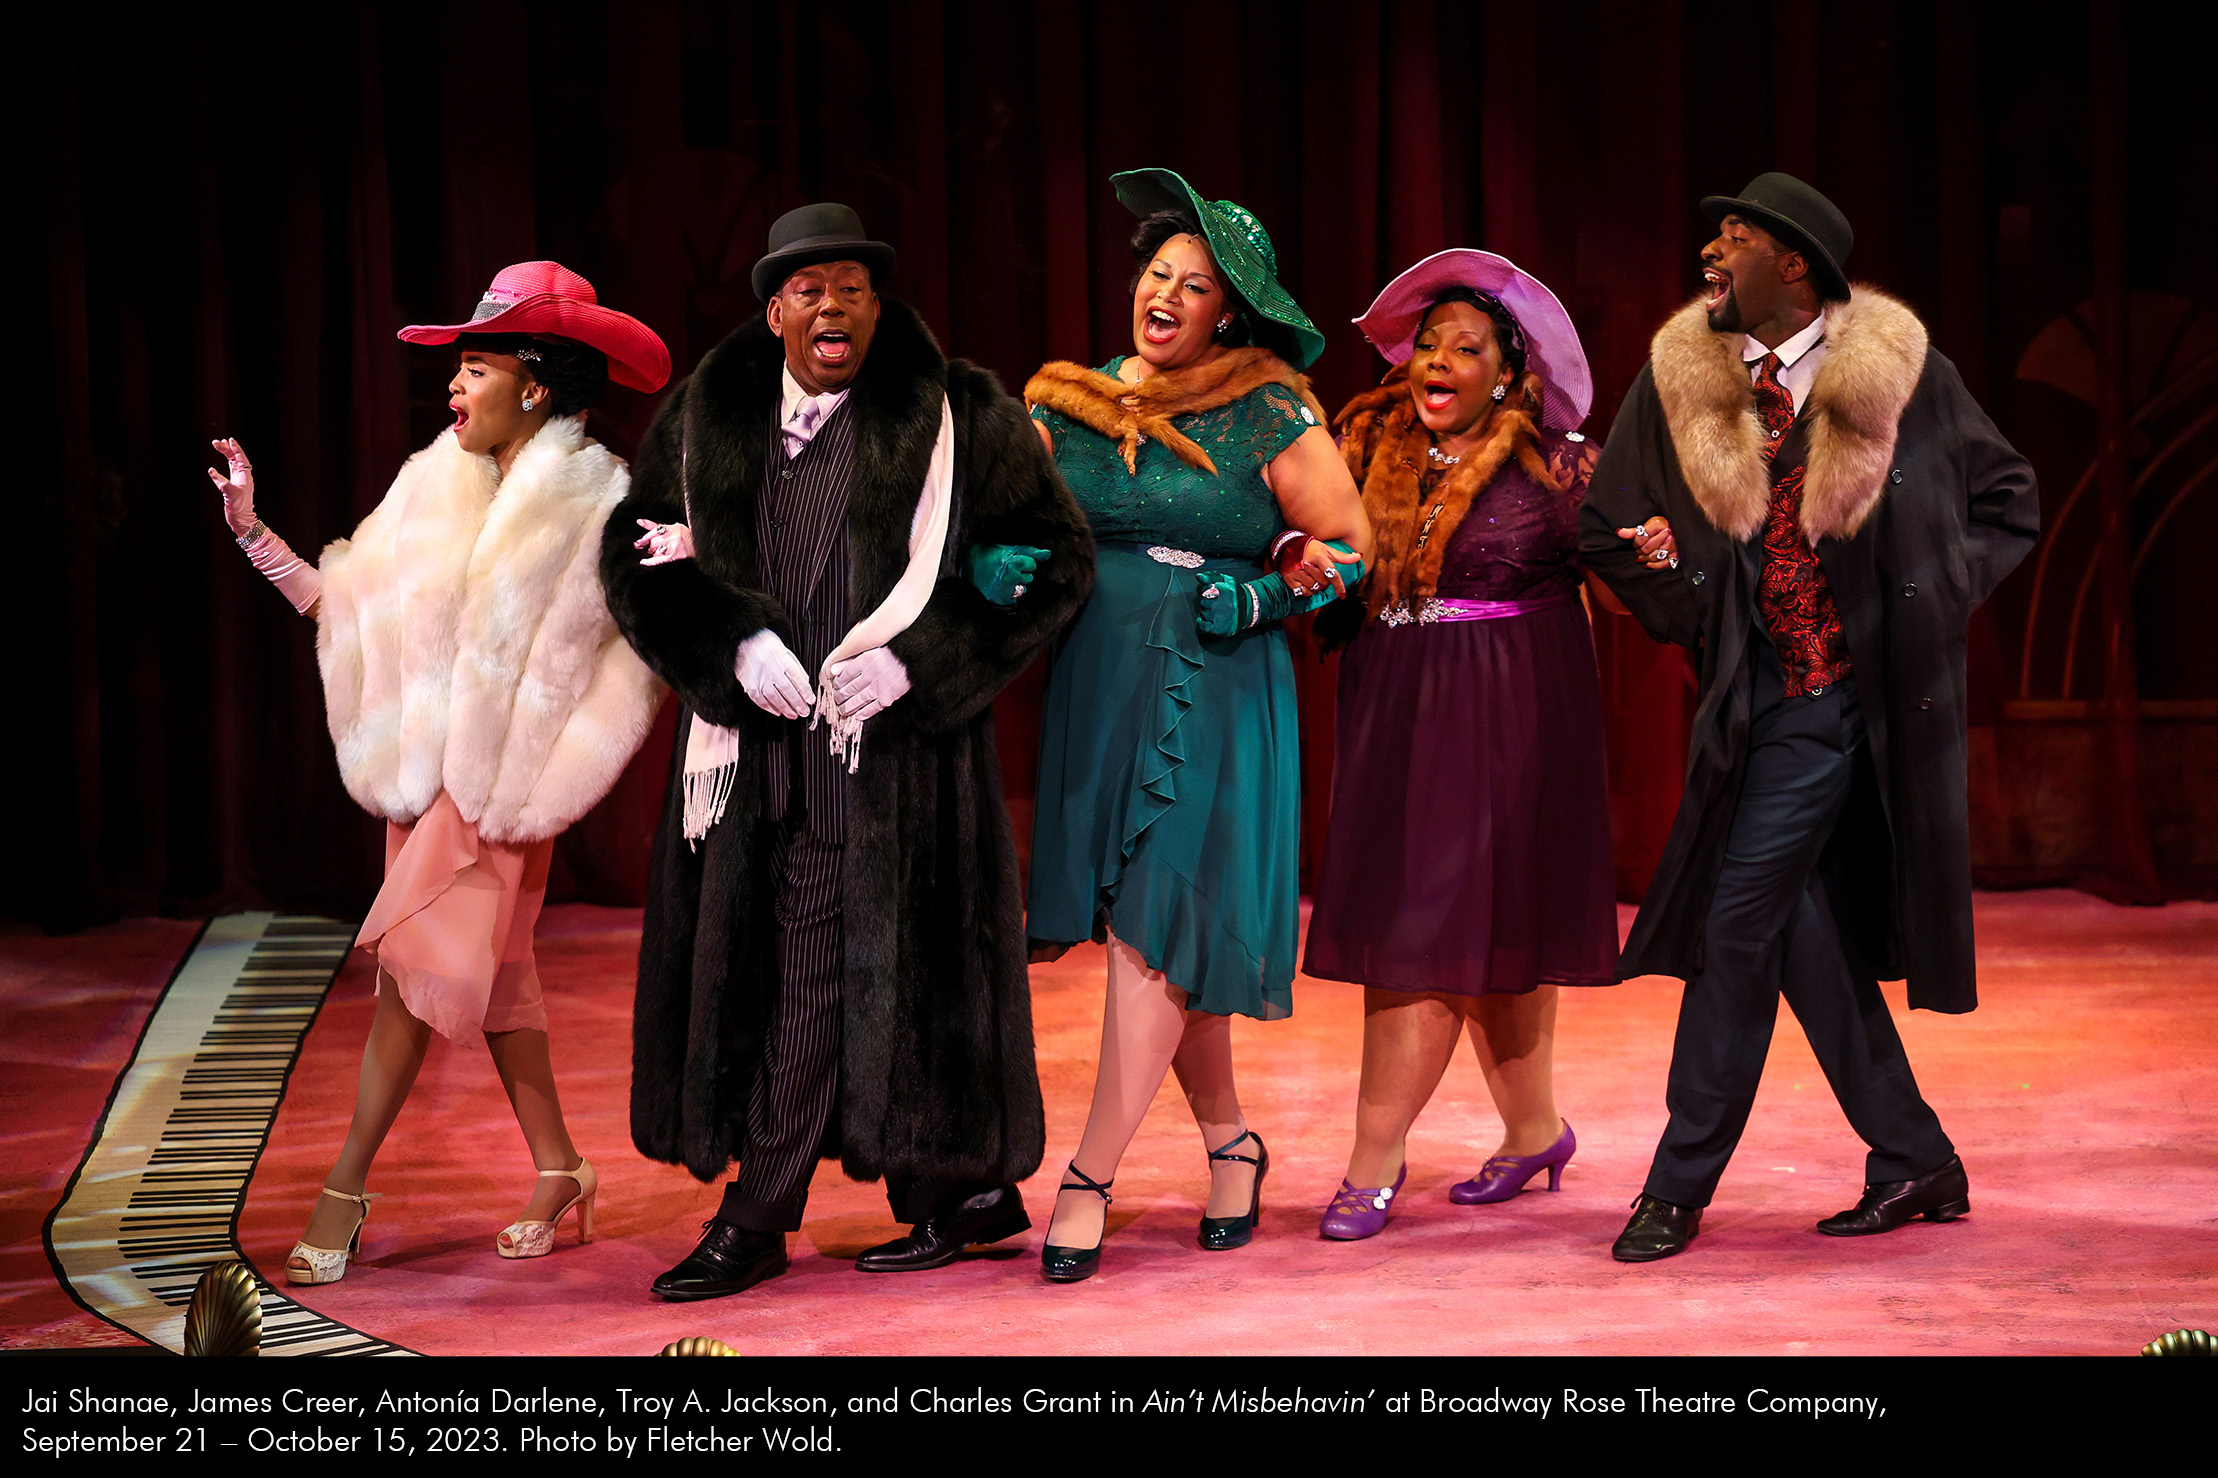 Jai Shane, James Creer, Antonía Darlene, Troy A. Jackson, and Charles Grant in Ain't Misbehavin' at Broadway Rose Theatre Companv, September 21 - October 15, 2023. Photo by Fletcher Wold.